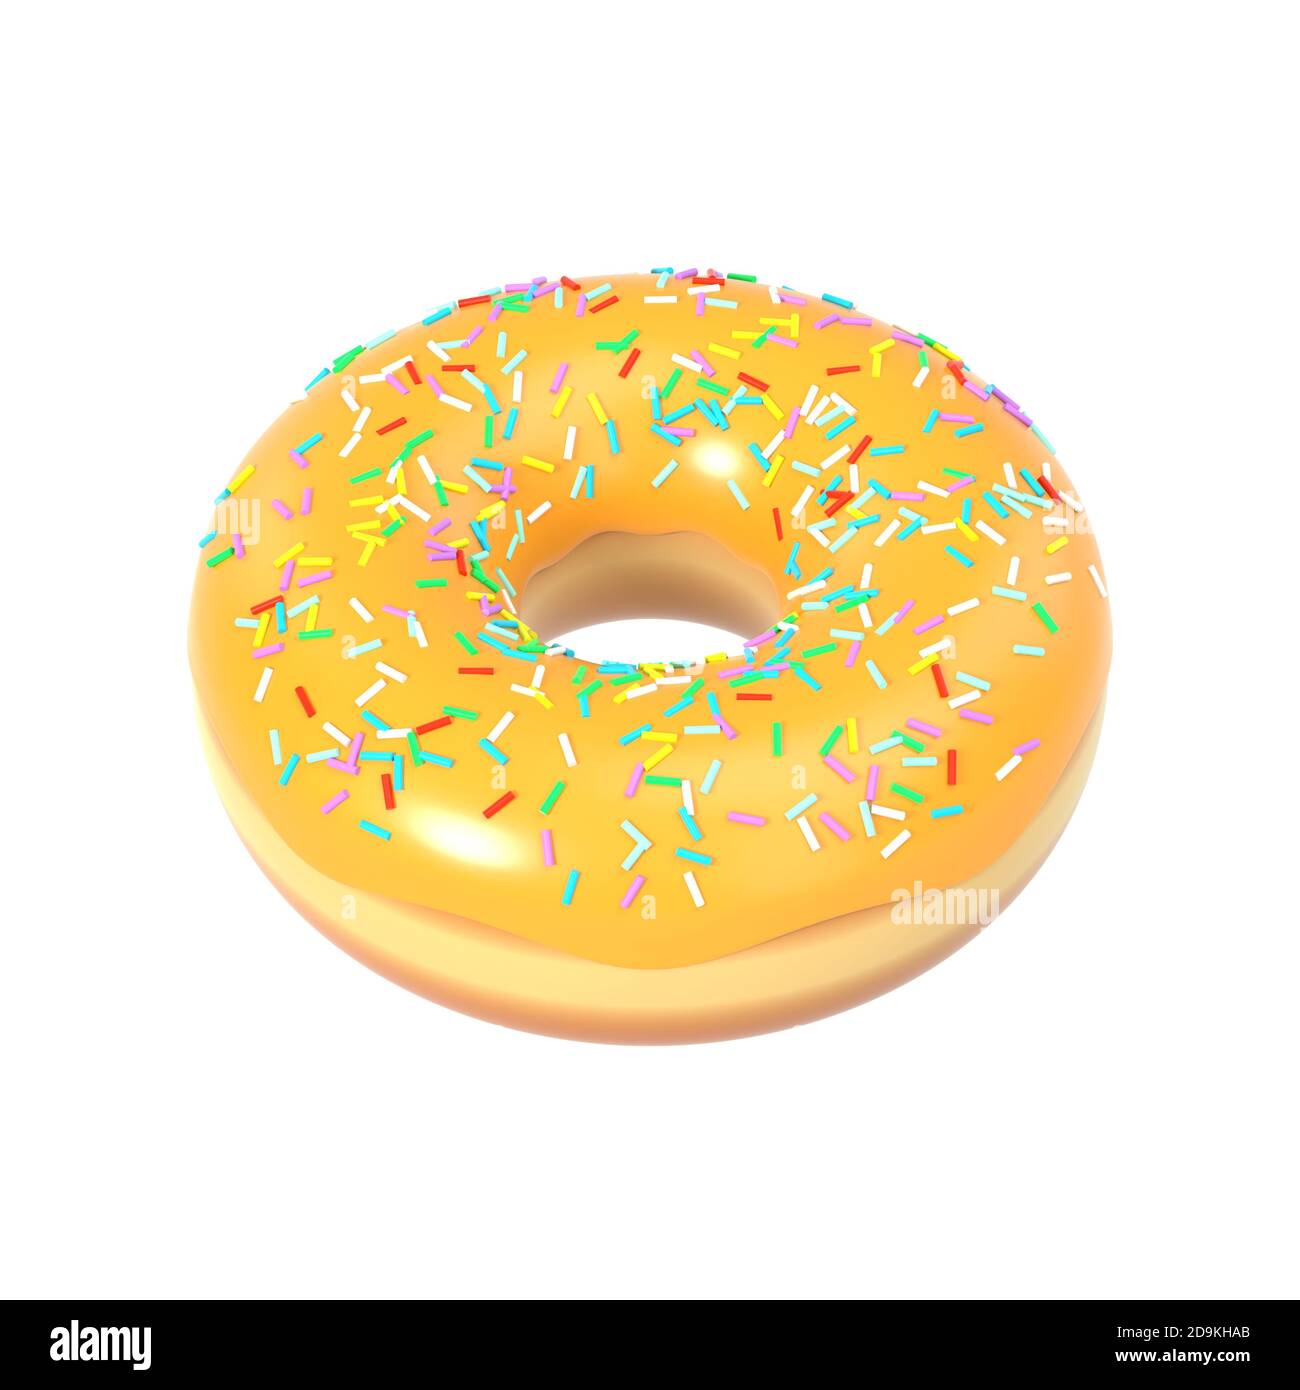 Delicious colorful donut with shiny sweet icing Stock Photo